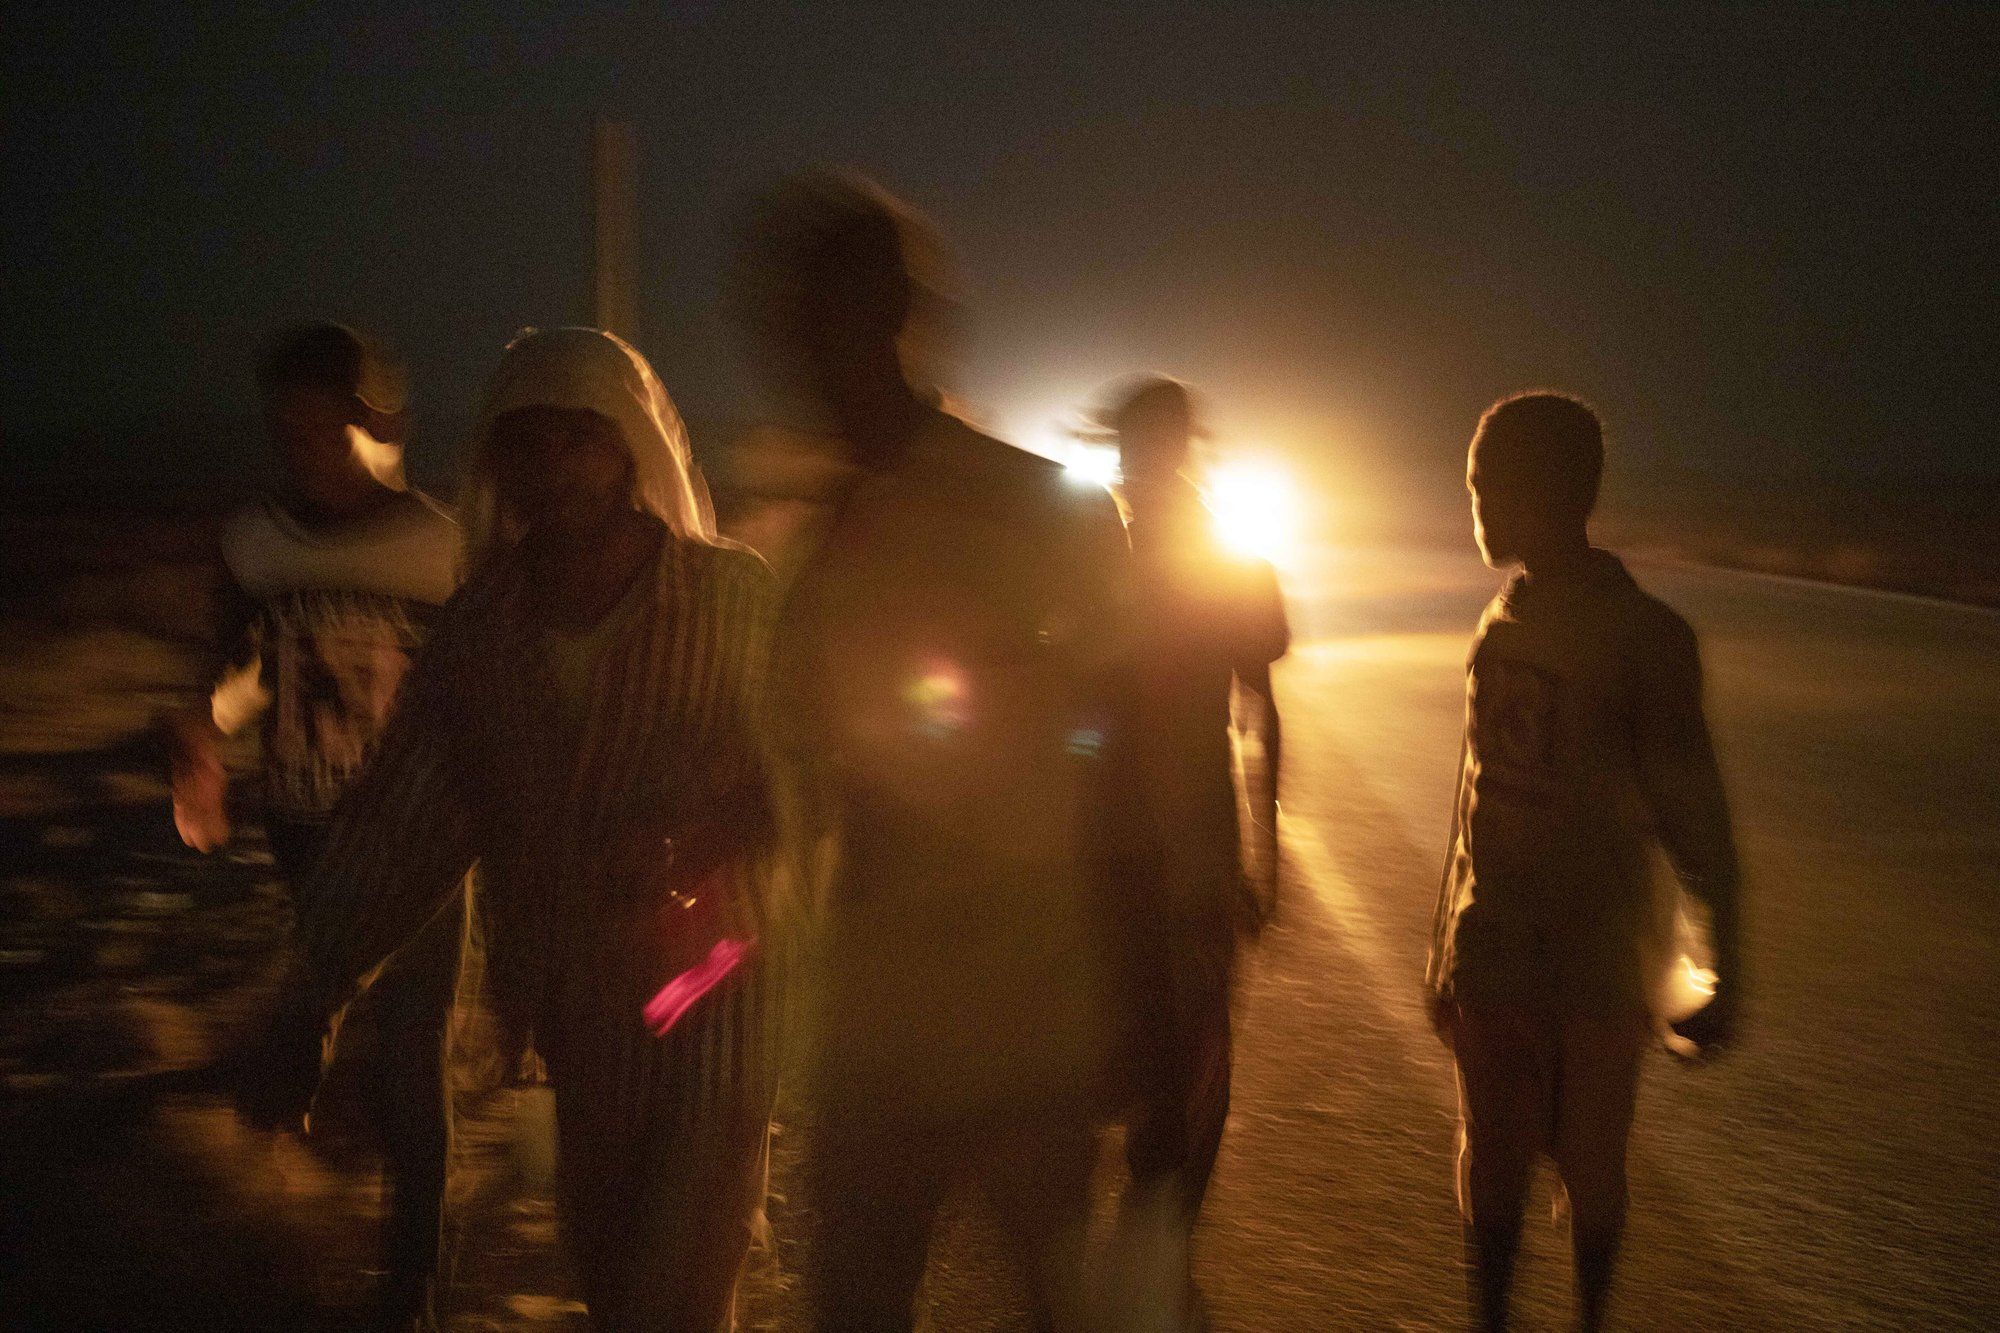 Mohammed Eissa, second left, walks on a highway with boys he met on the way, around 50 kilometers (31 miles) from Djibouti. Image by AP Photo/Nariman El-Mofty. Djibouti, 2020.